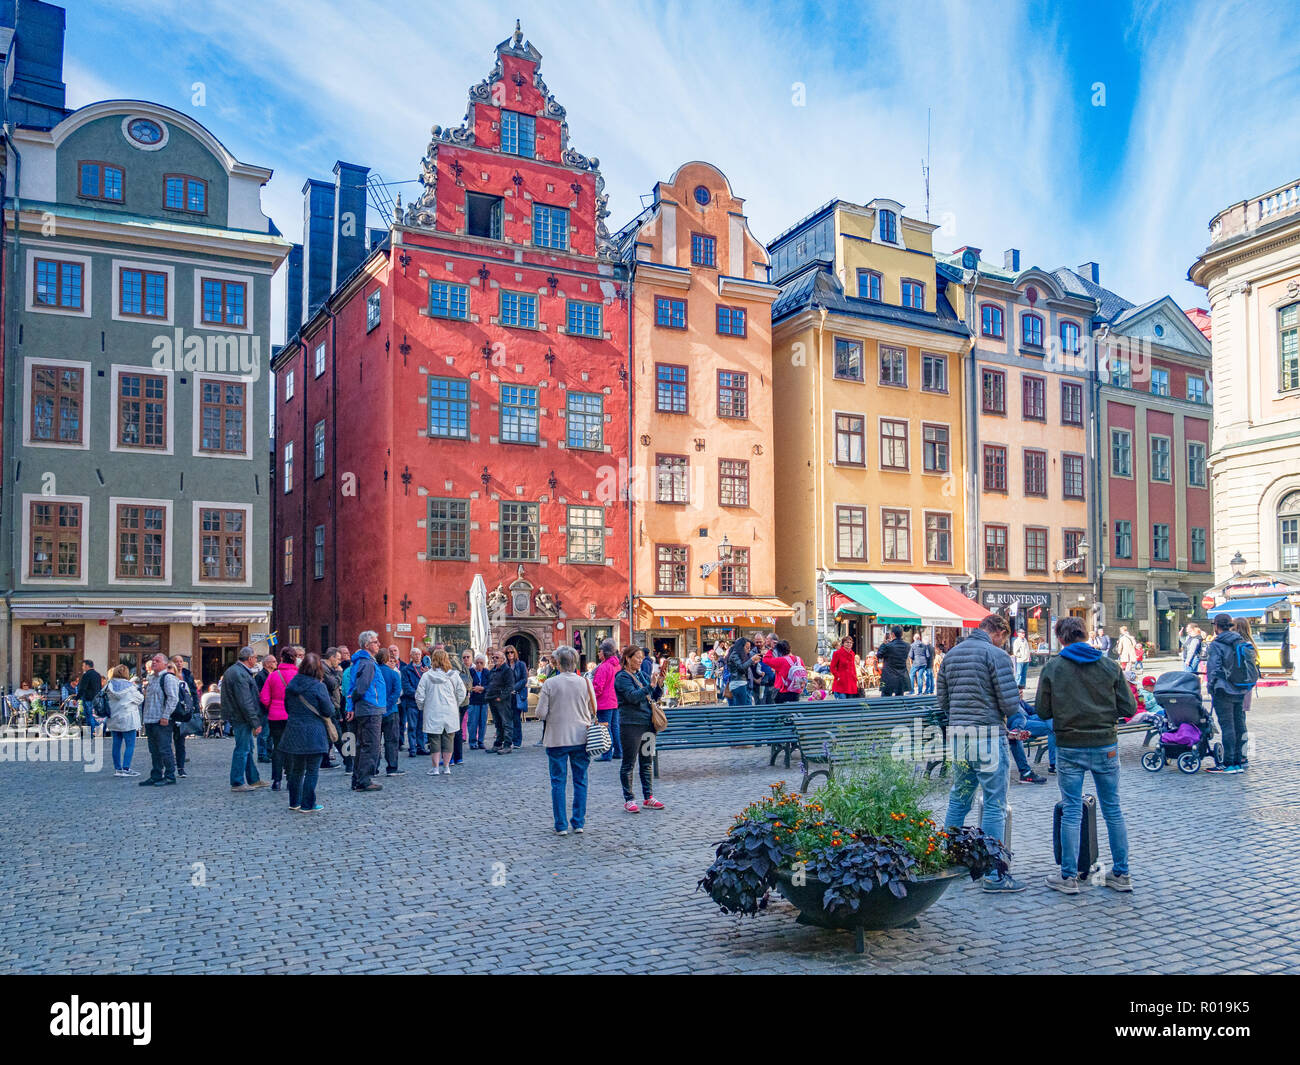 18 September 2018: Stockholm, Sweden - Tourists enjoying the ambience whilst sightseeing in Stortorget, the oldest square in the old town, Gamla Stan. Stock Photo